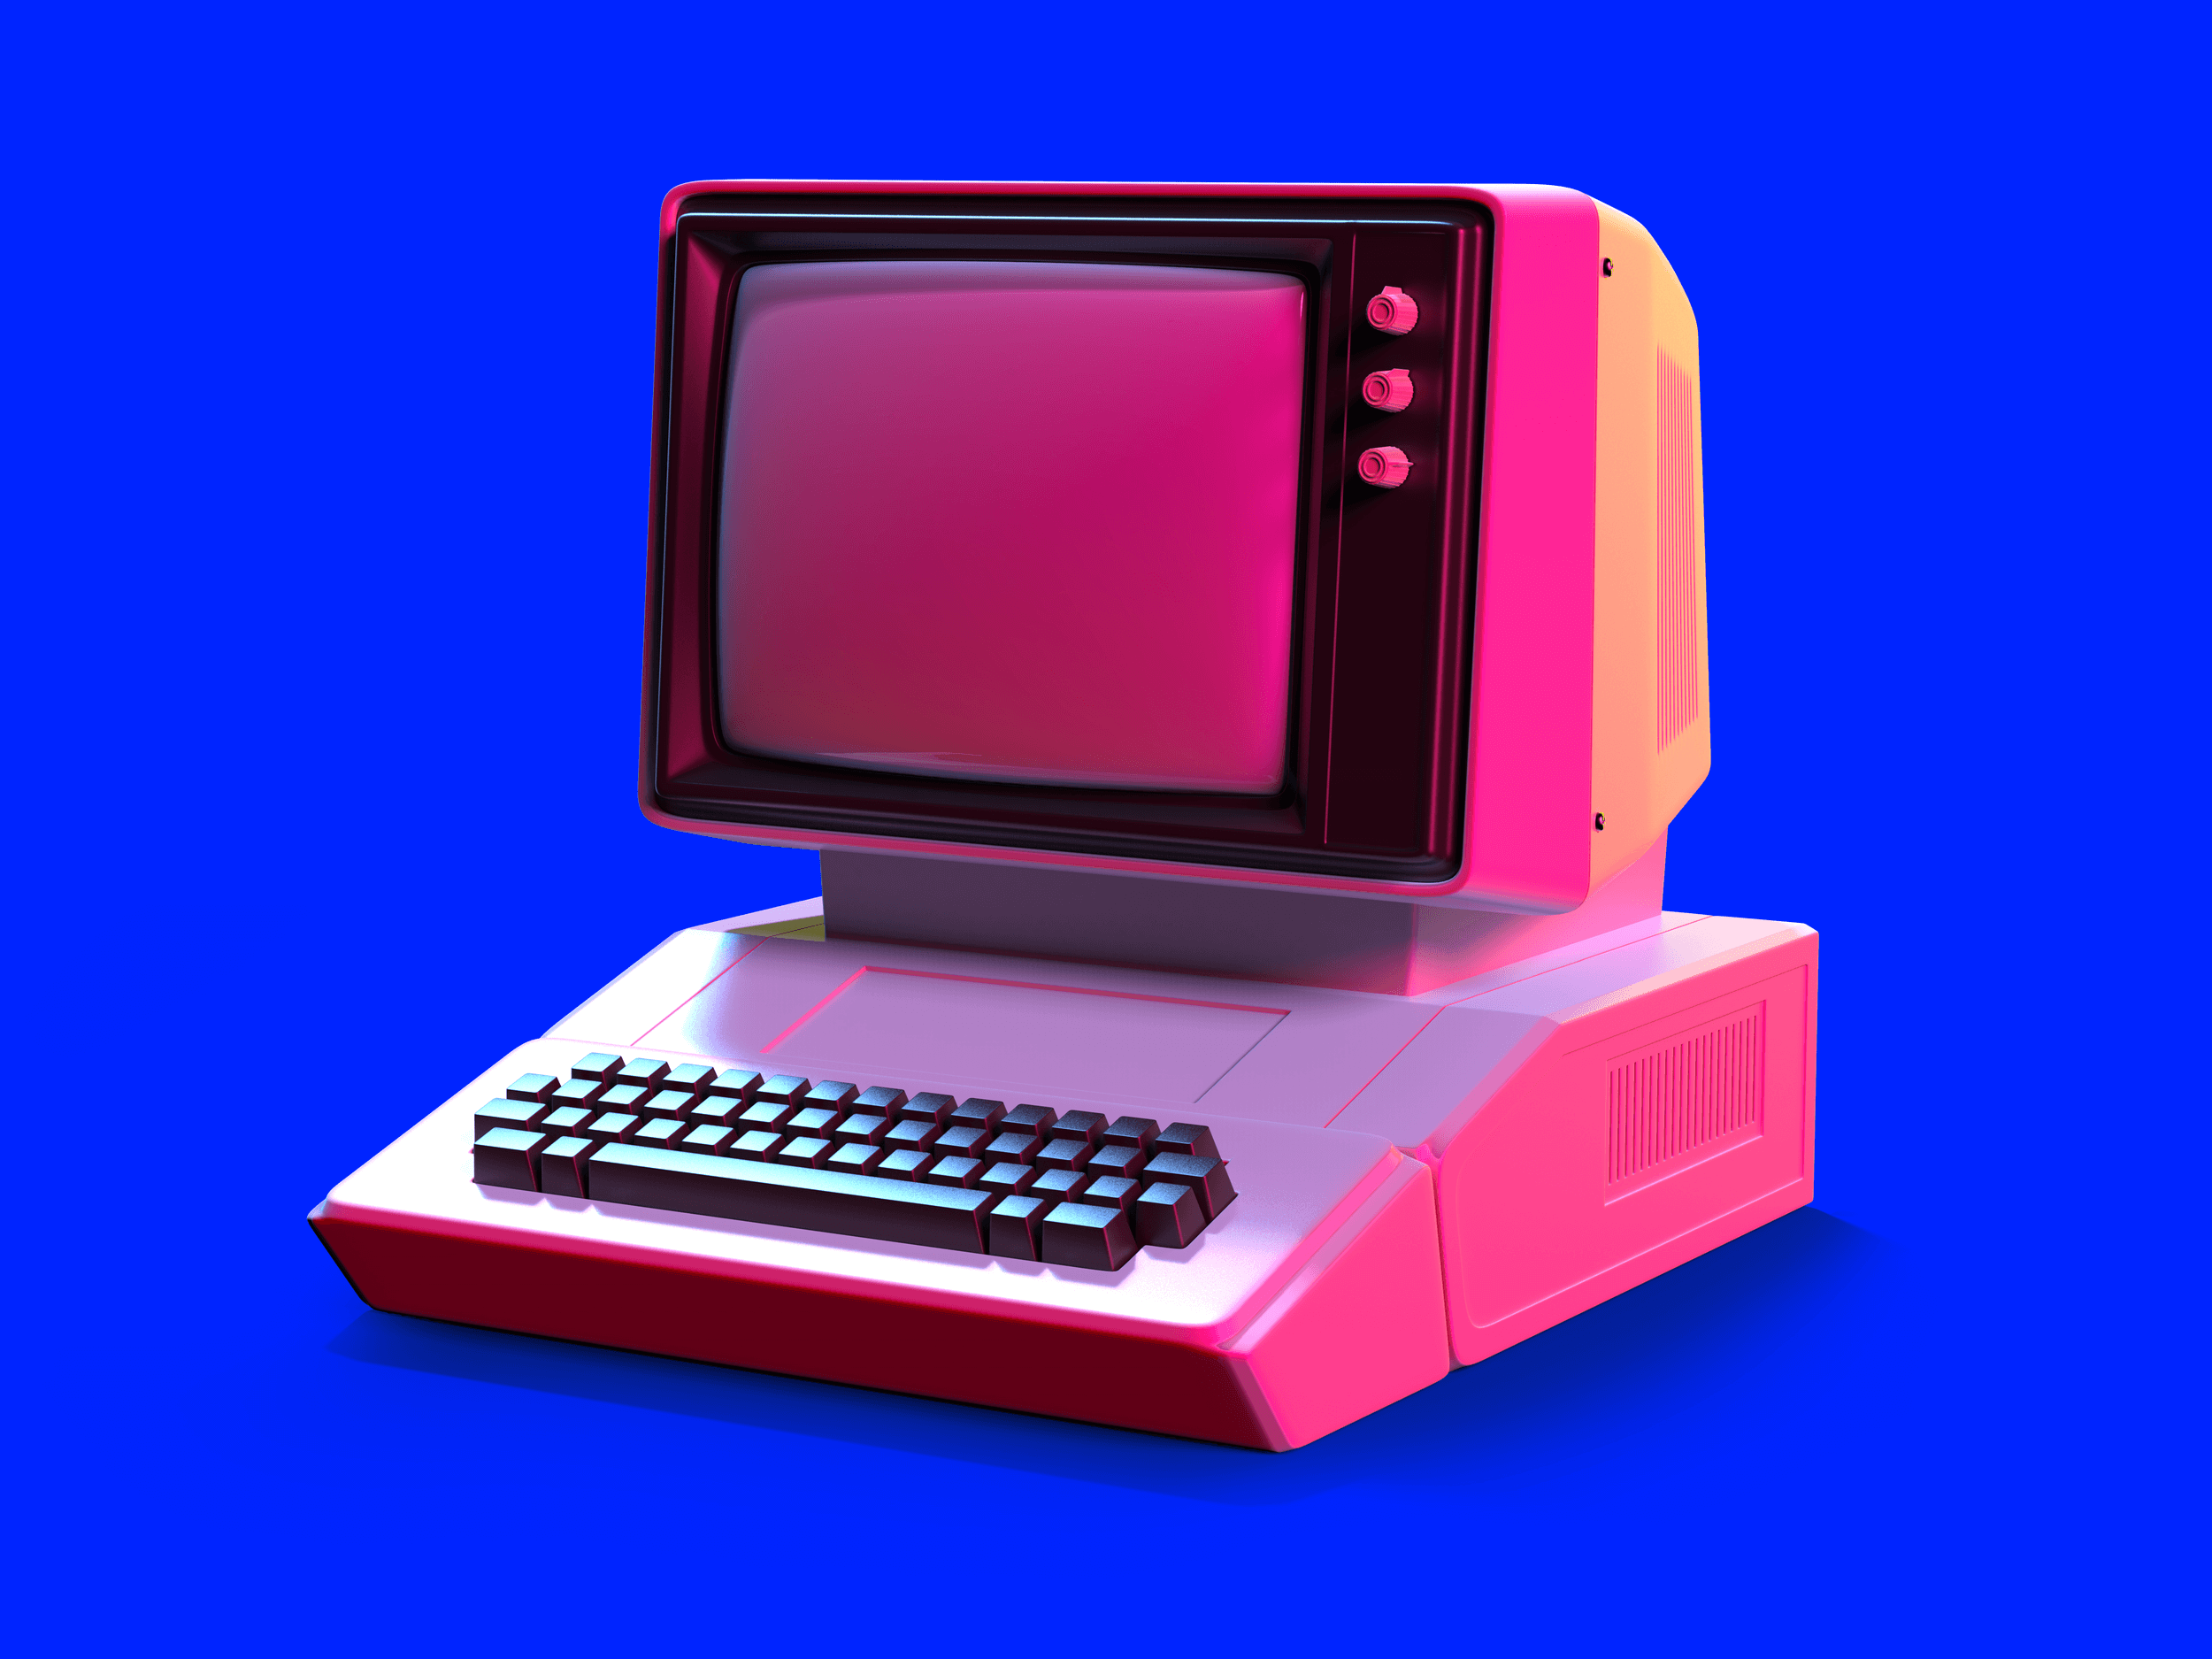 Old-fashioned personal computer in retro 80s style. 3d illustration